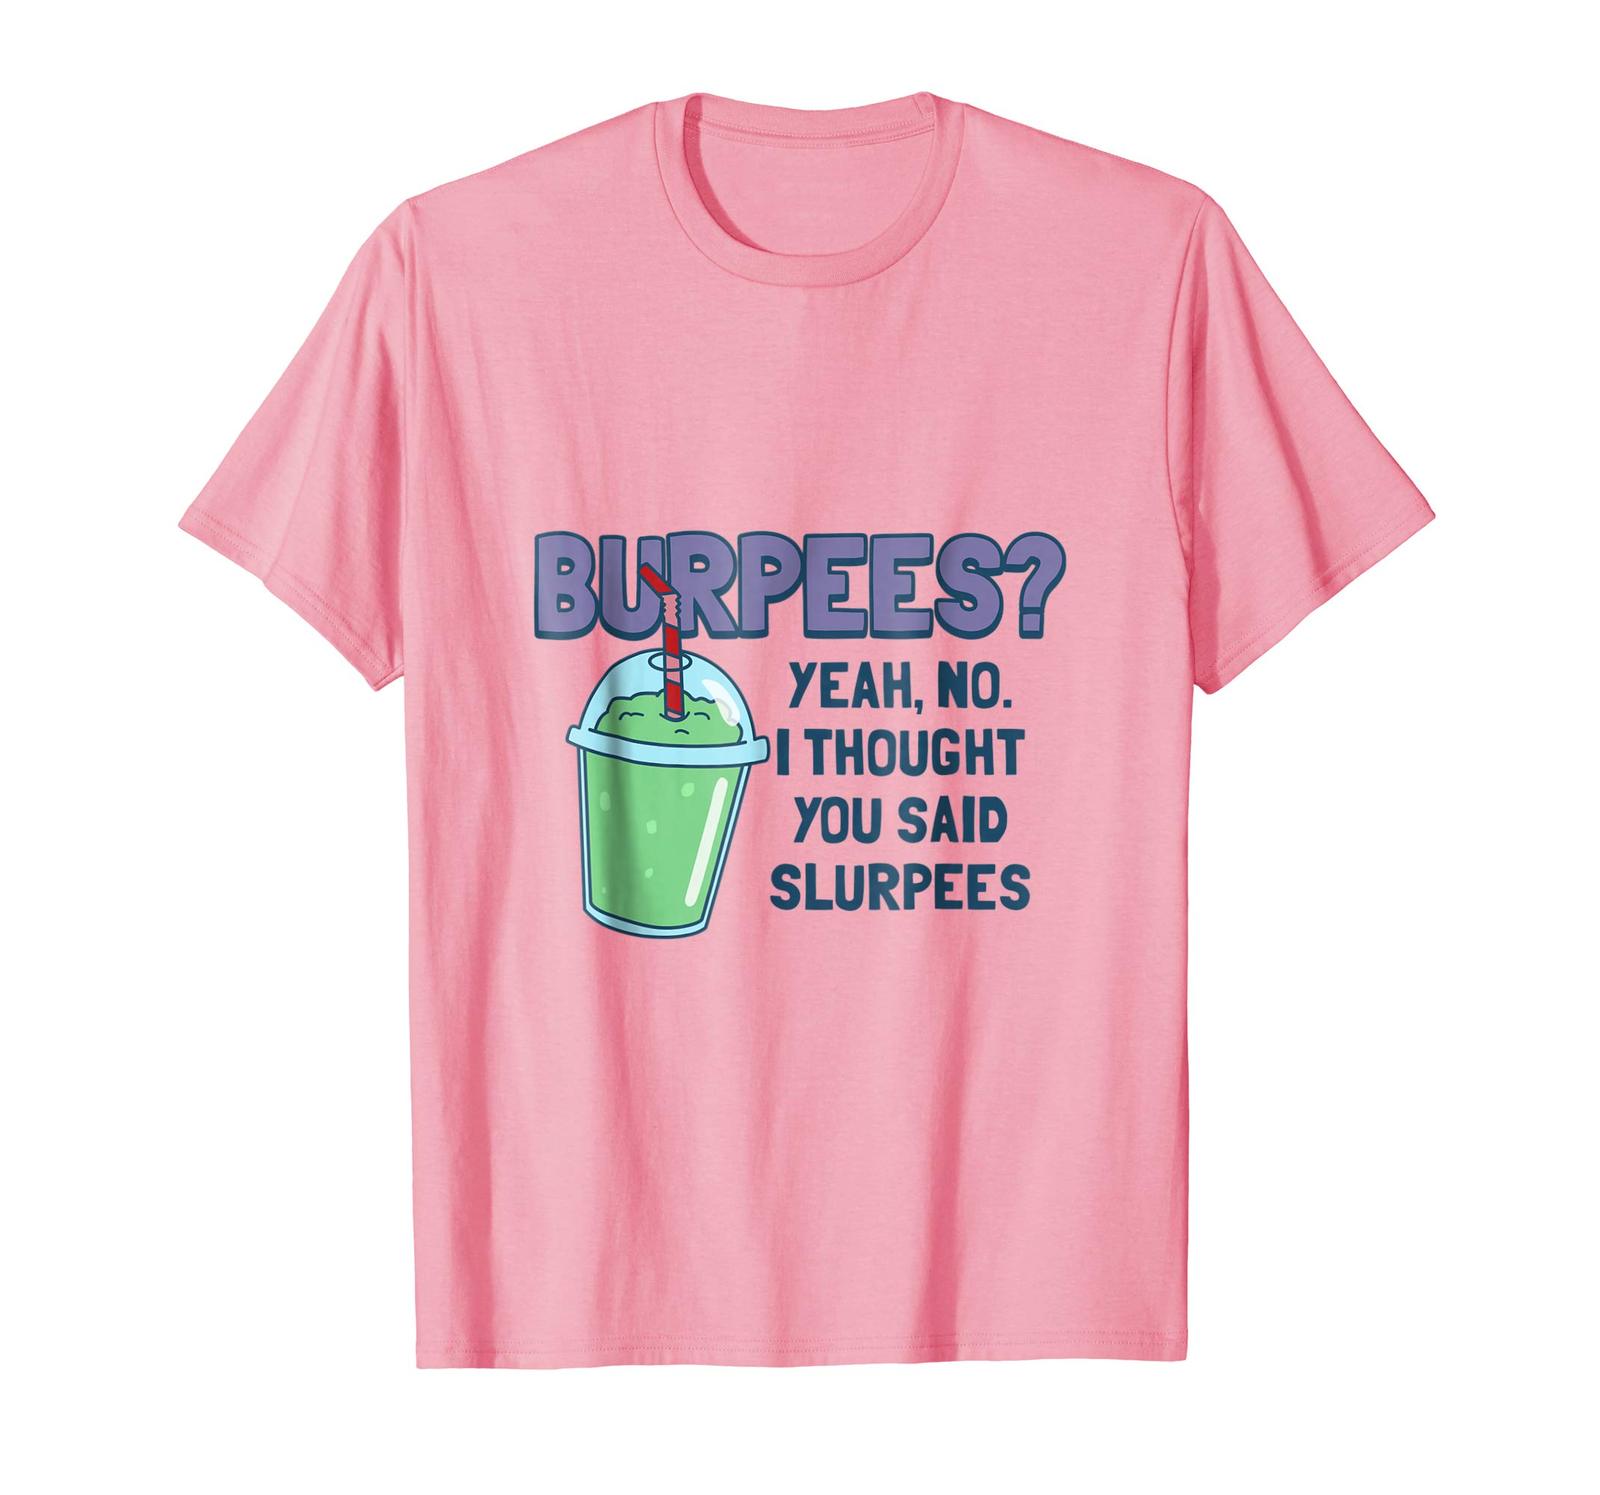 Sport Shirts - Burpees I thought you said Slurpees funny Burpees Shirt ...